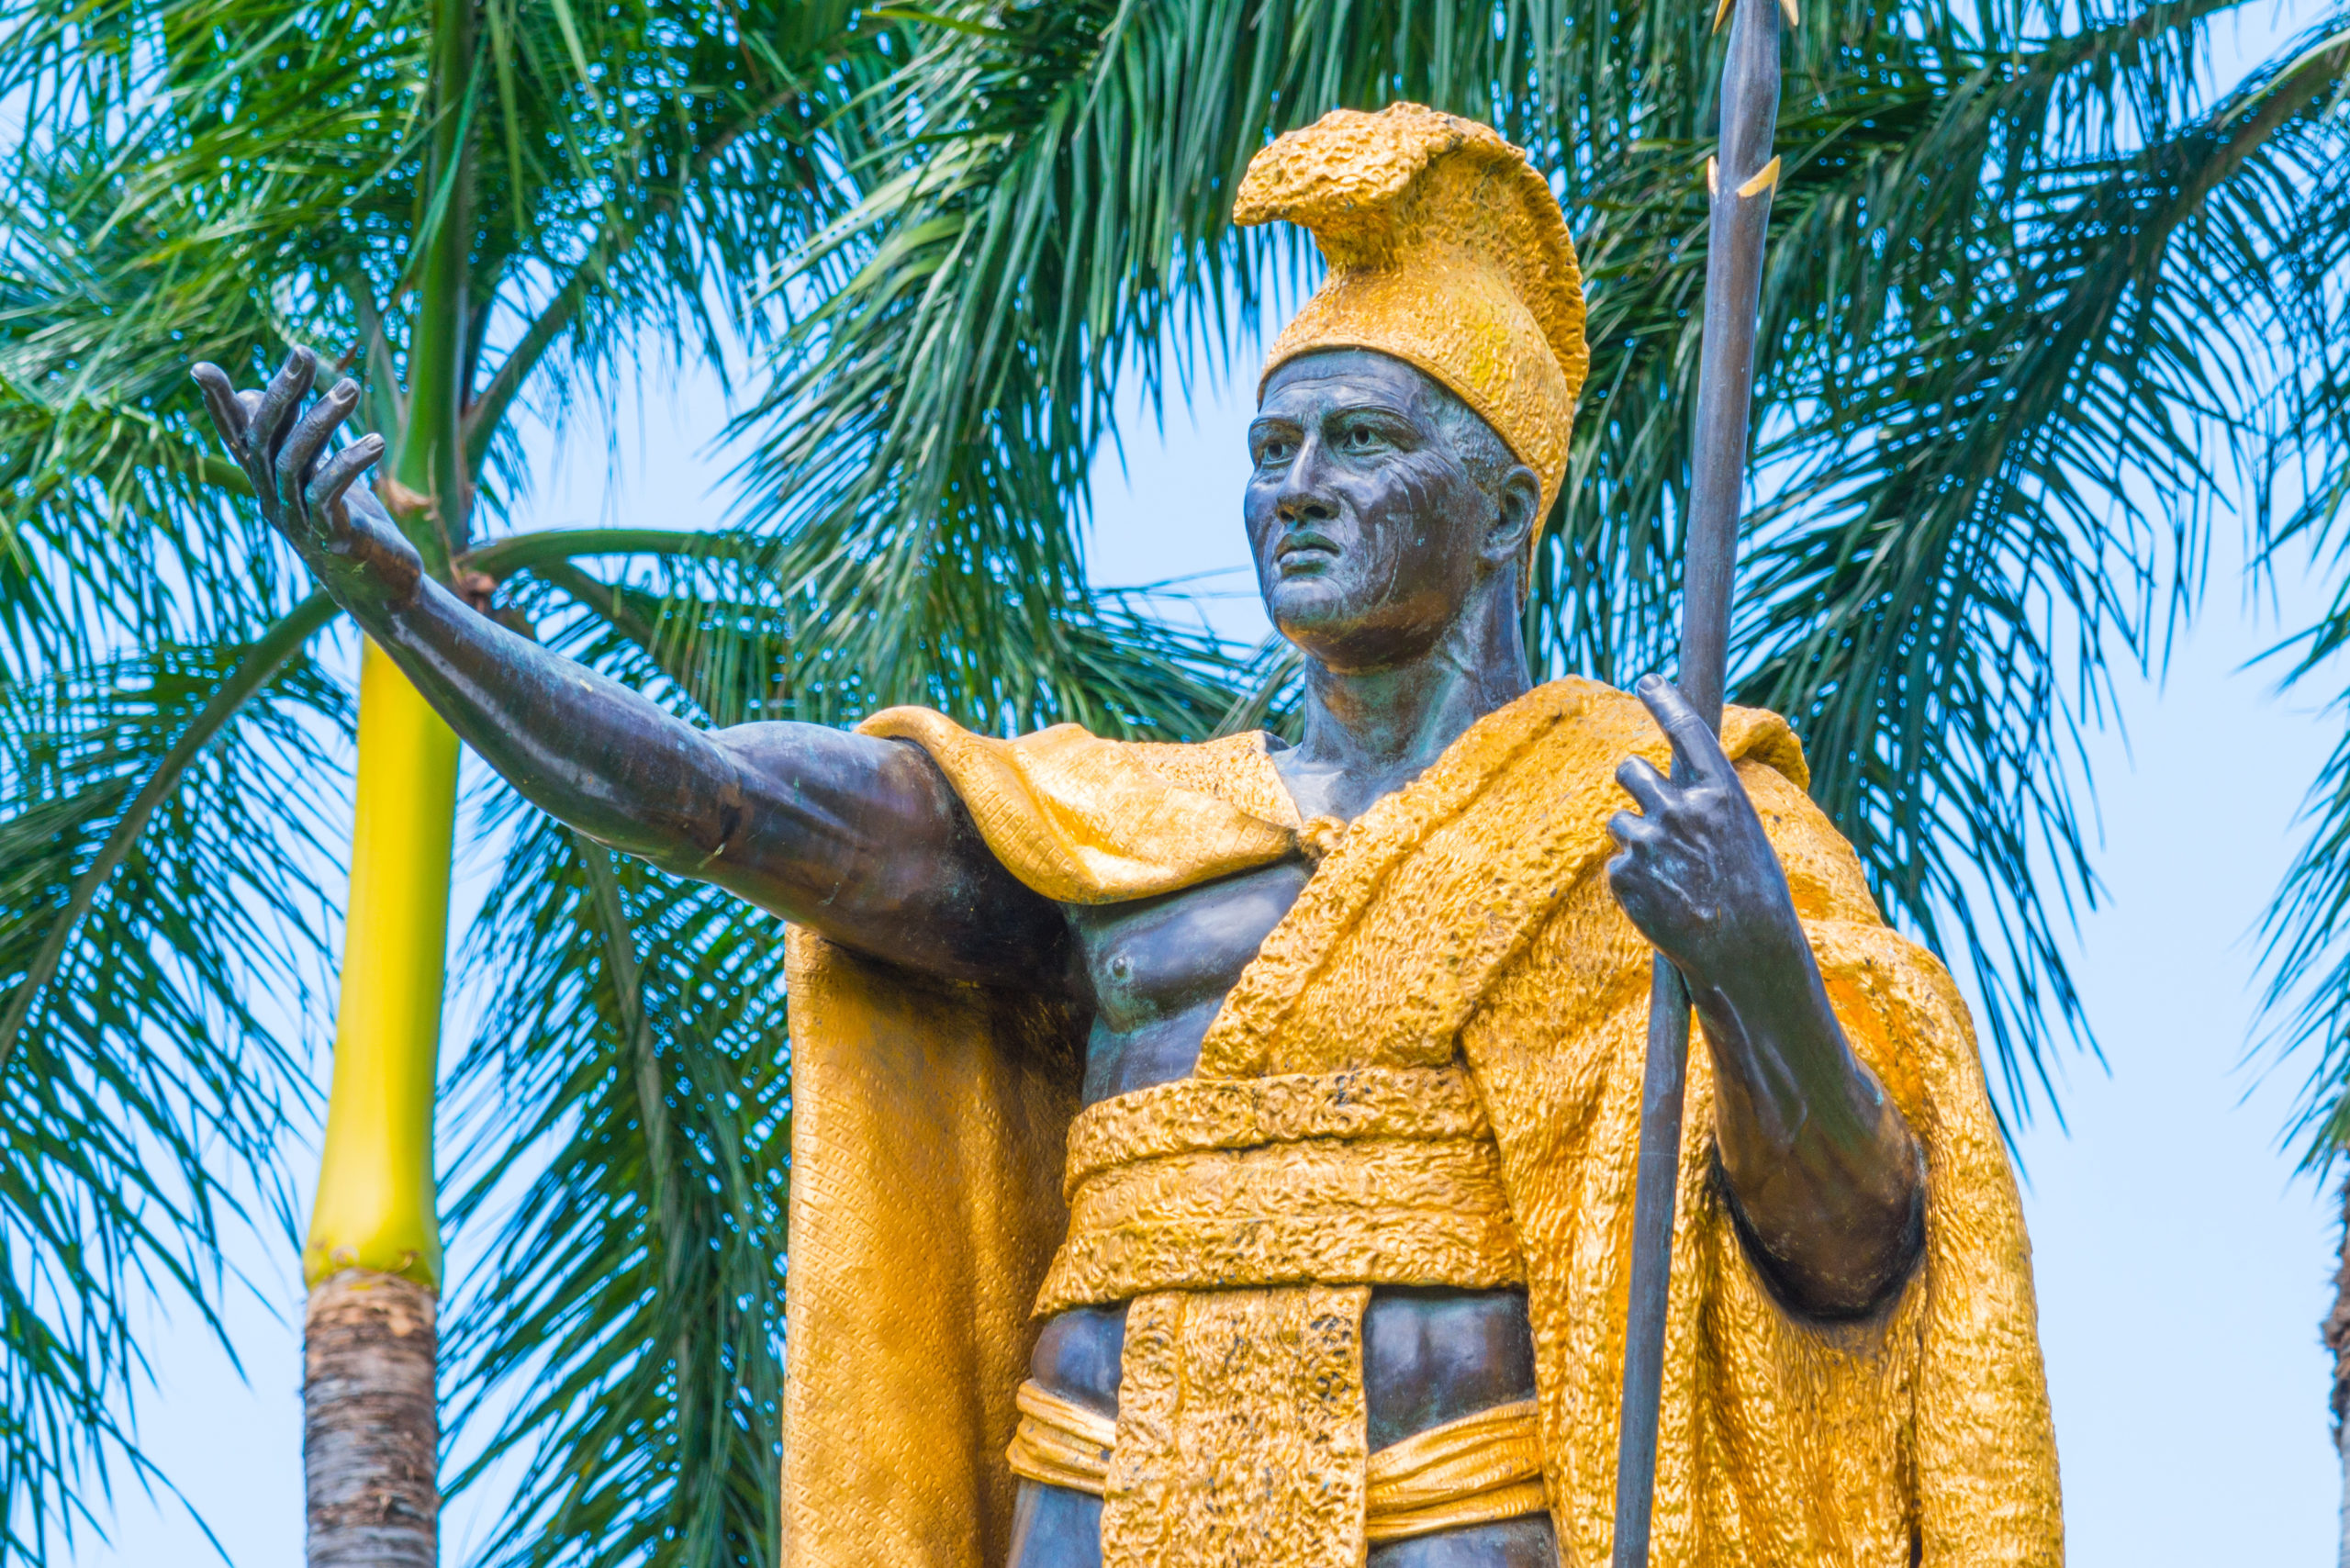 The-King-Kamehameha-statue-in-Honolulu-may-be-the-most-photographed-item-in-all-of-the-state-of-Hawaii